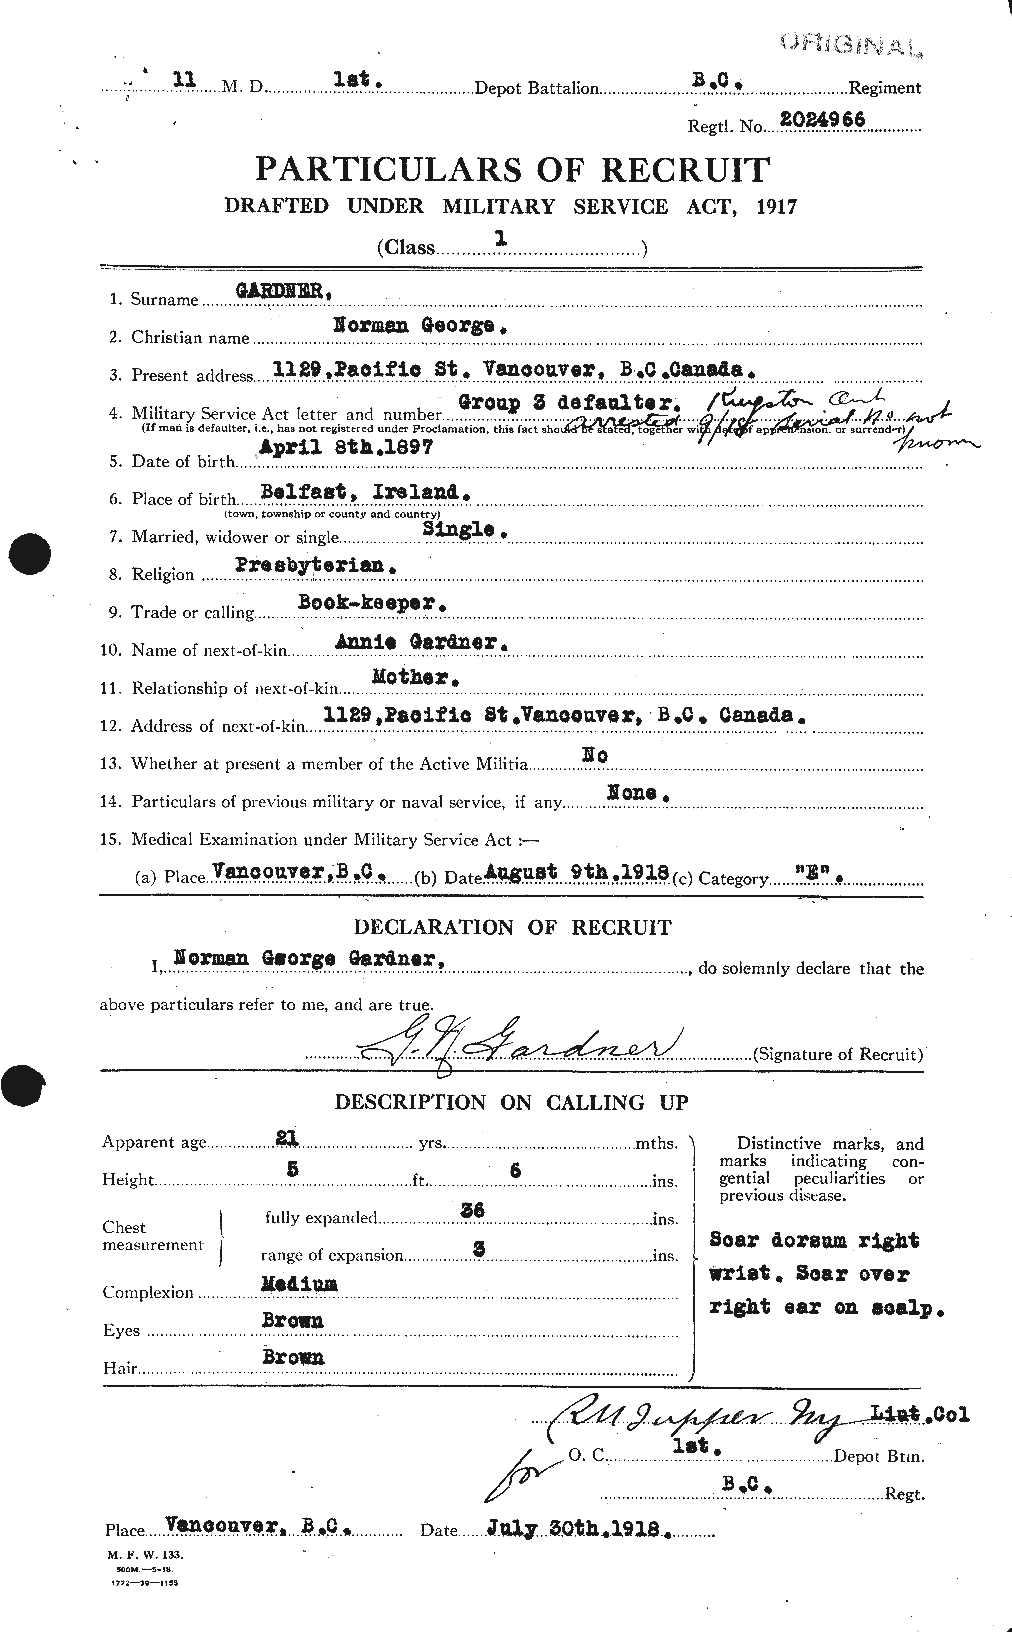 Personnel Records of the First World War - CEF 342487a